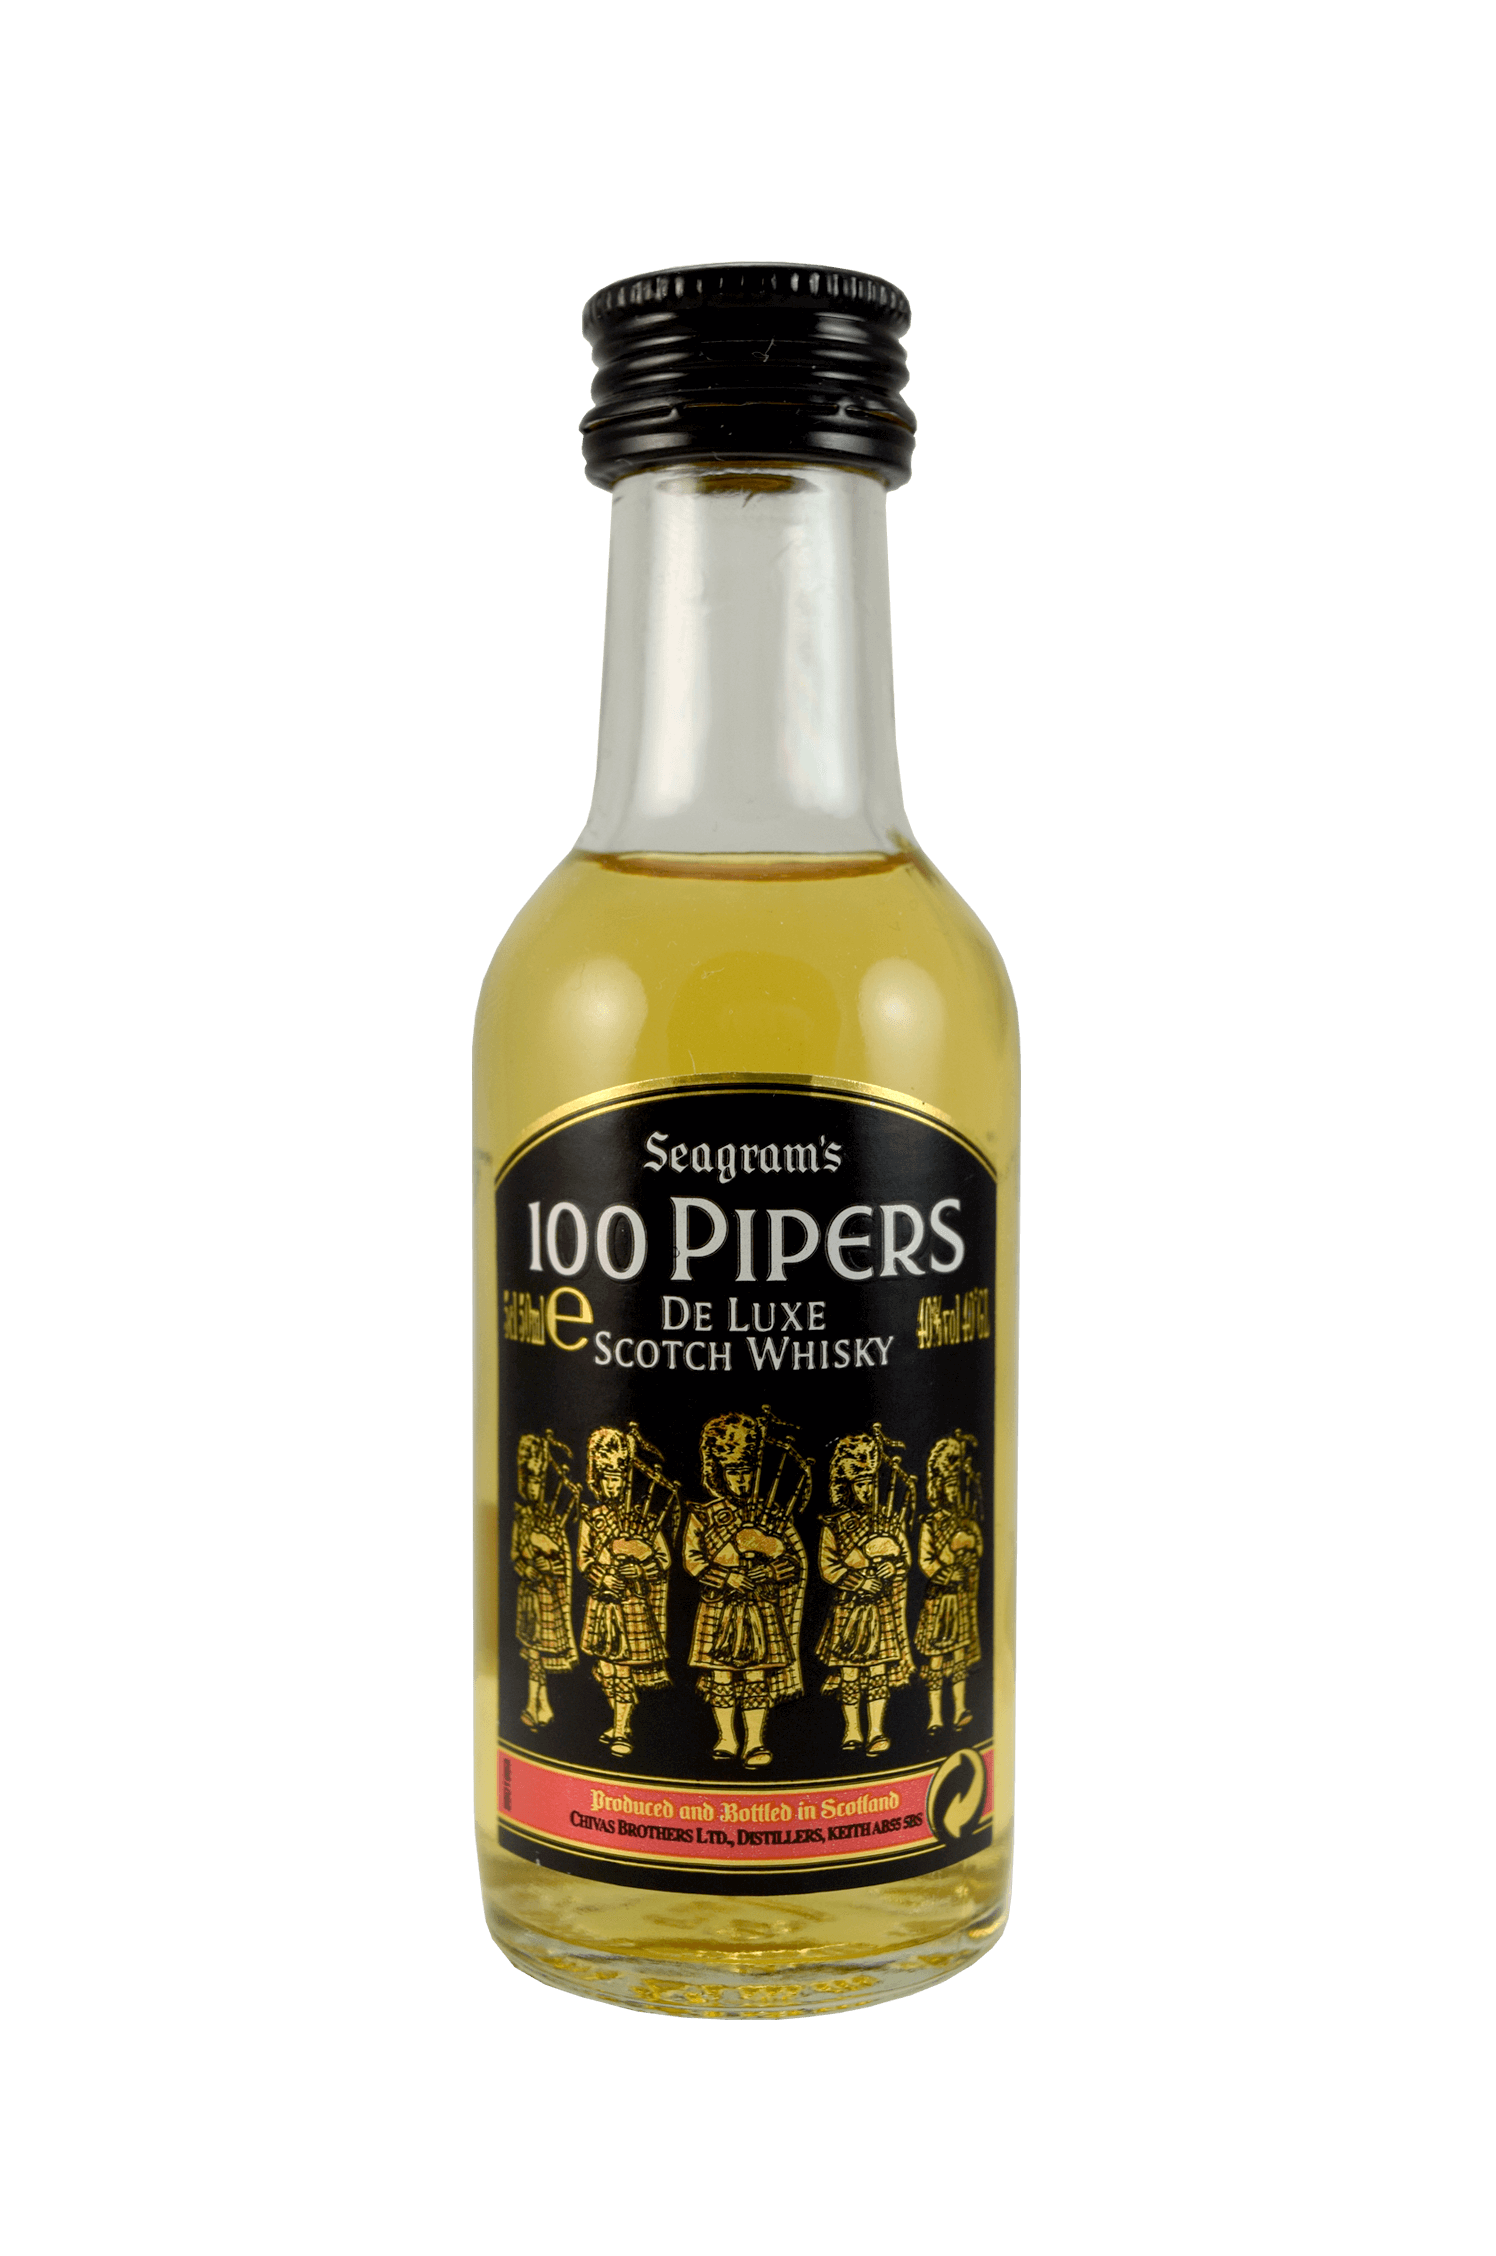 Seagram’s 100 Pipers Whisky